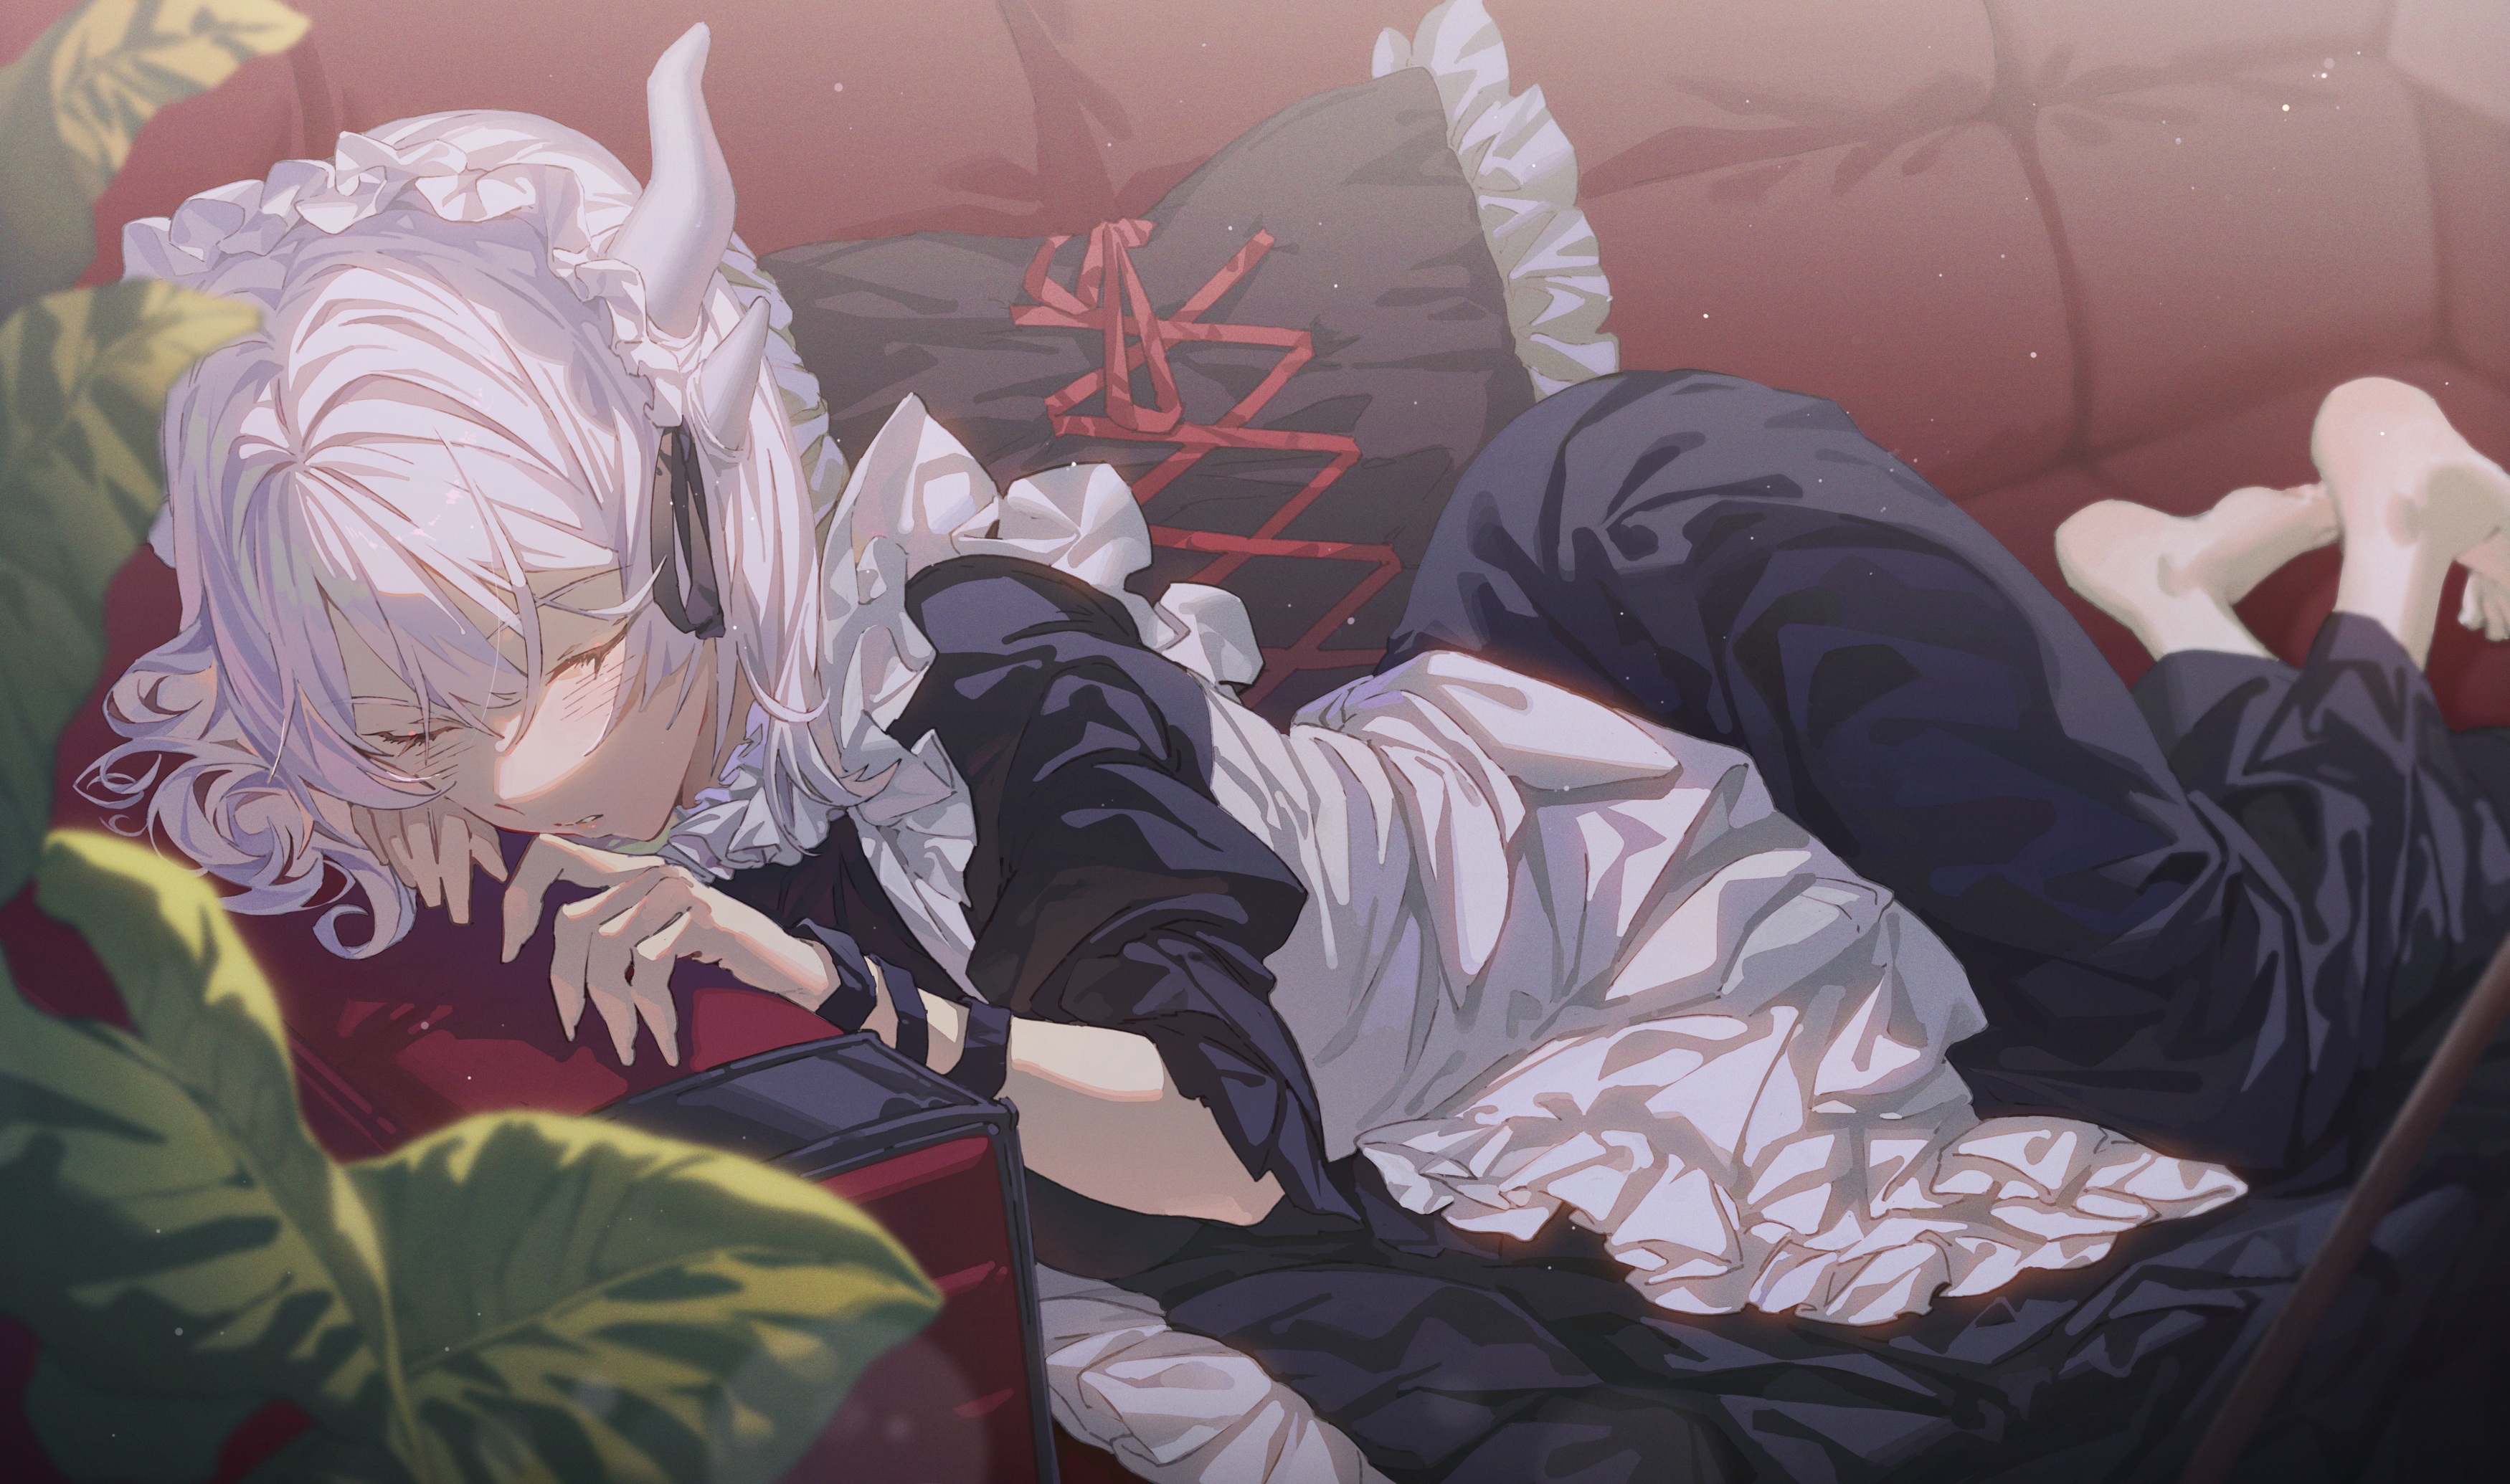 Anime Anime Girls Couch Plants Leaves White Hair Hair In Face Barefoot Red Couch Horns Maid Outfit S 3500x2070